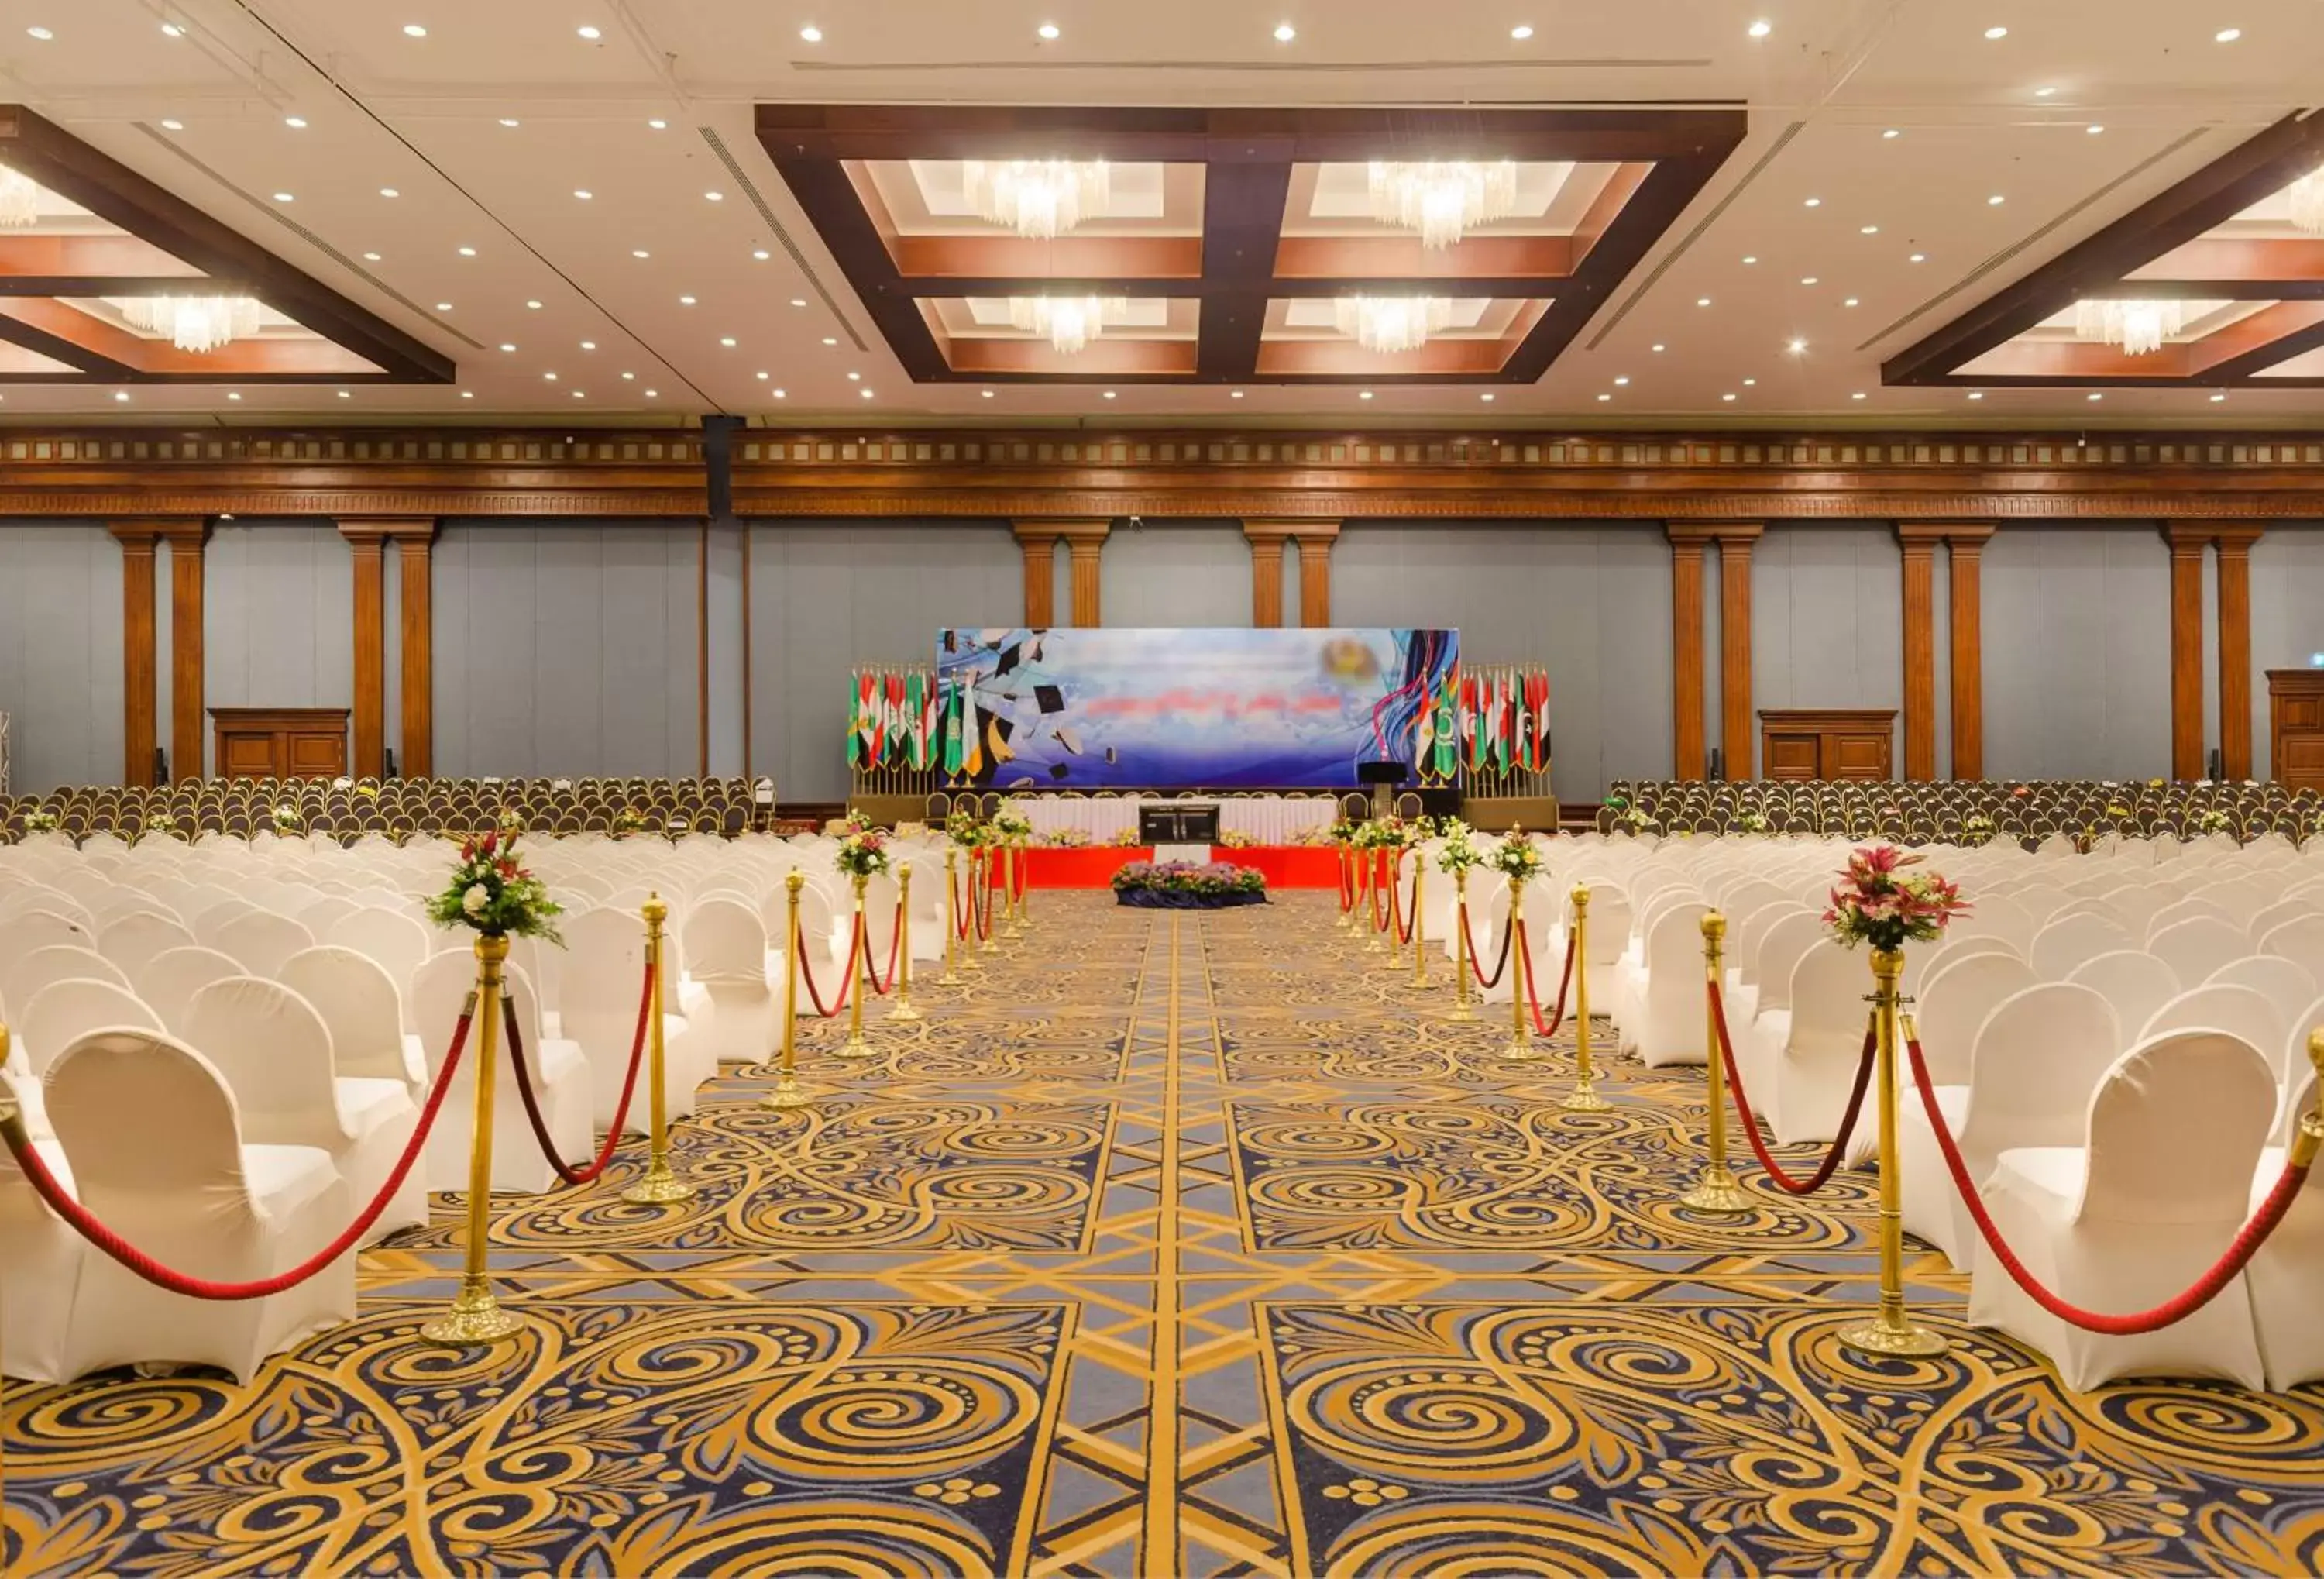 Meeting/conference room, Banquet Facilities in Hilton Alexandria Green Plaza